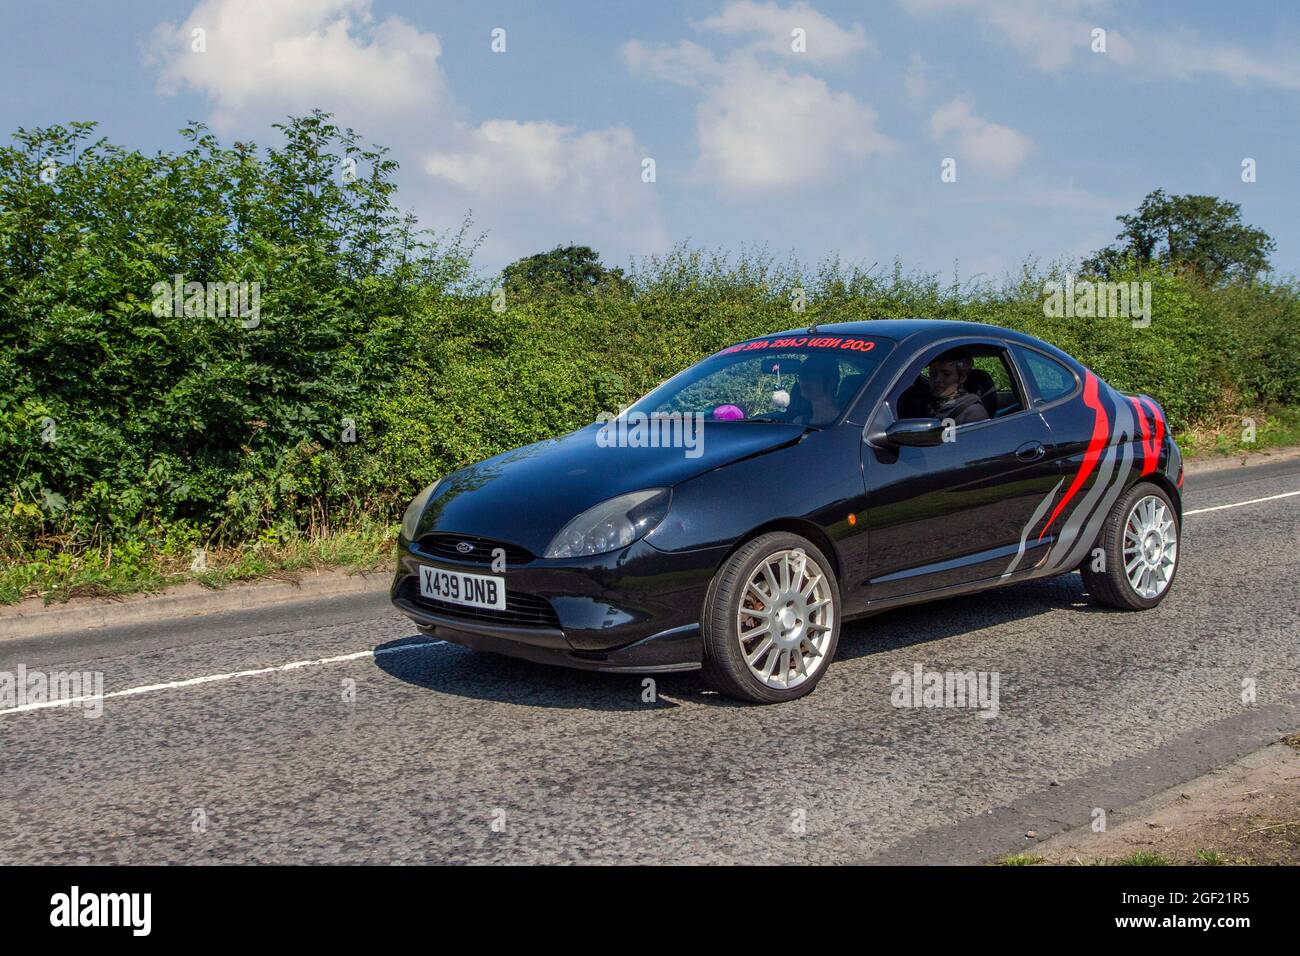 bladeren genie gekruld 2001 black Ford Puma 1.7 16v Millenium 5 speed manual, 1679cc 2dr coupe  en-route to Capesthorne Hall classic July car show, Cheshire, UK Stock  Photo - Alamy